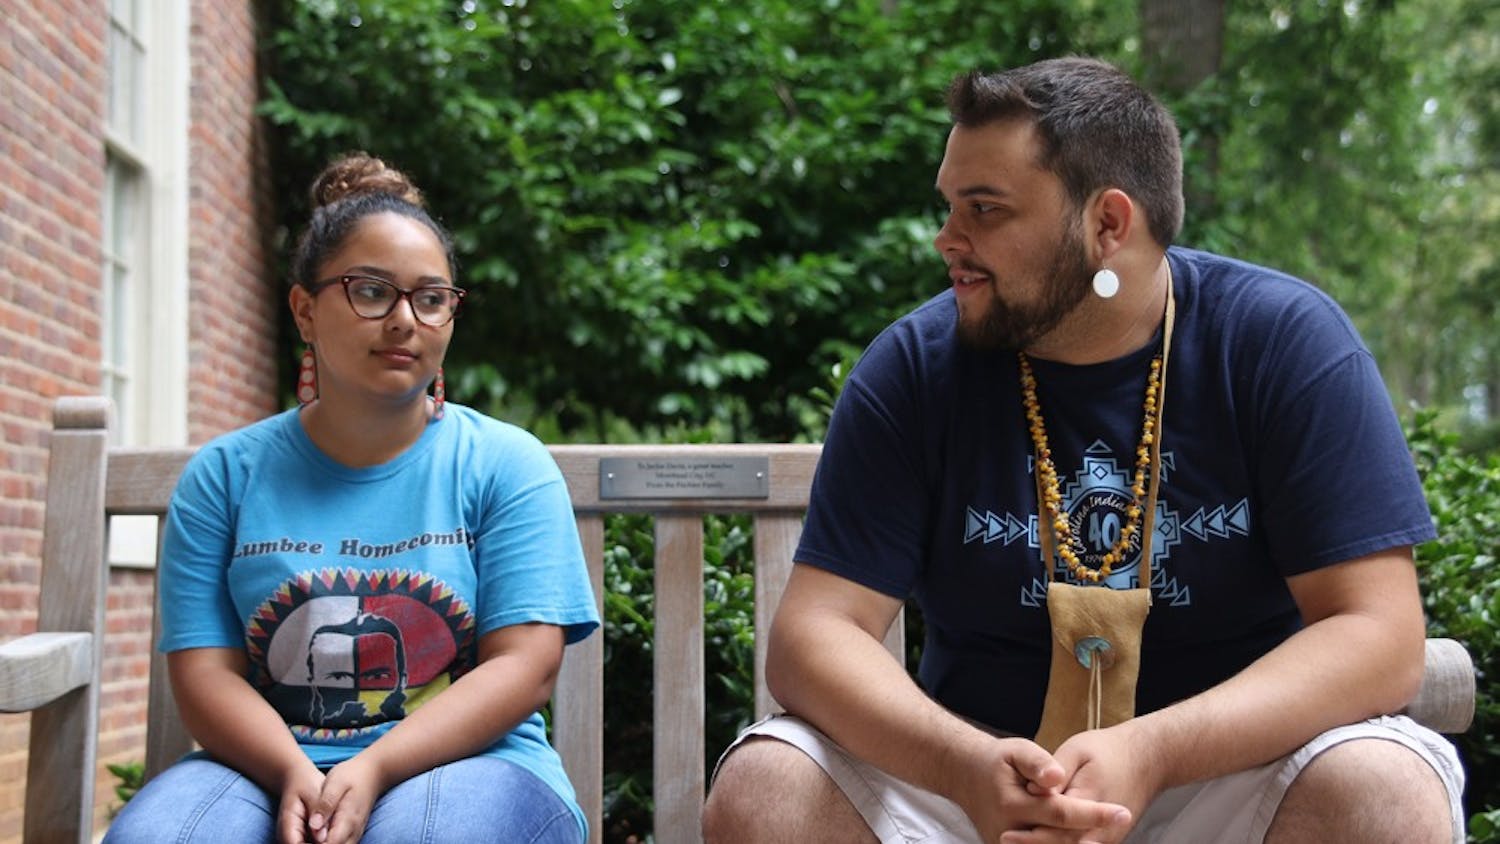 Sophomore&nbsp;Elena Polanco and First-Year Ryan Stanley sit and discuss the Lumbee tribe and their Lumbee&nbsp;heritage.